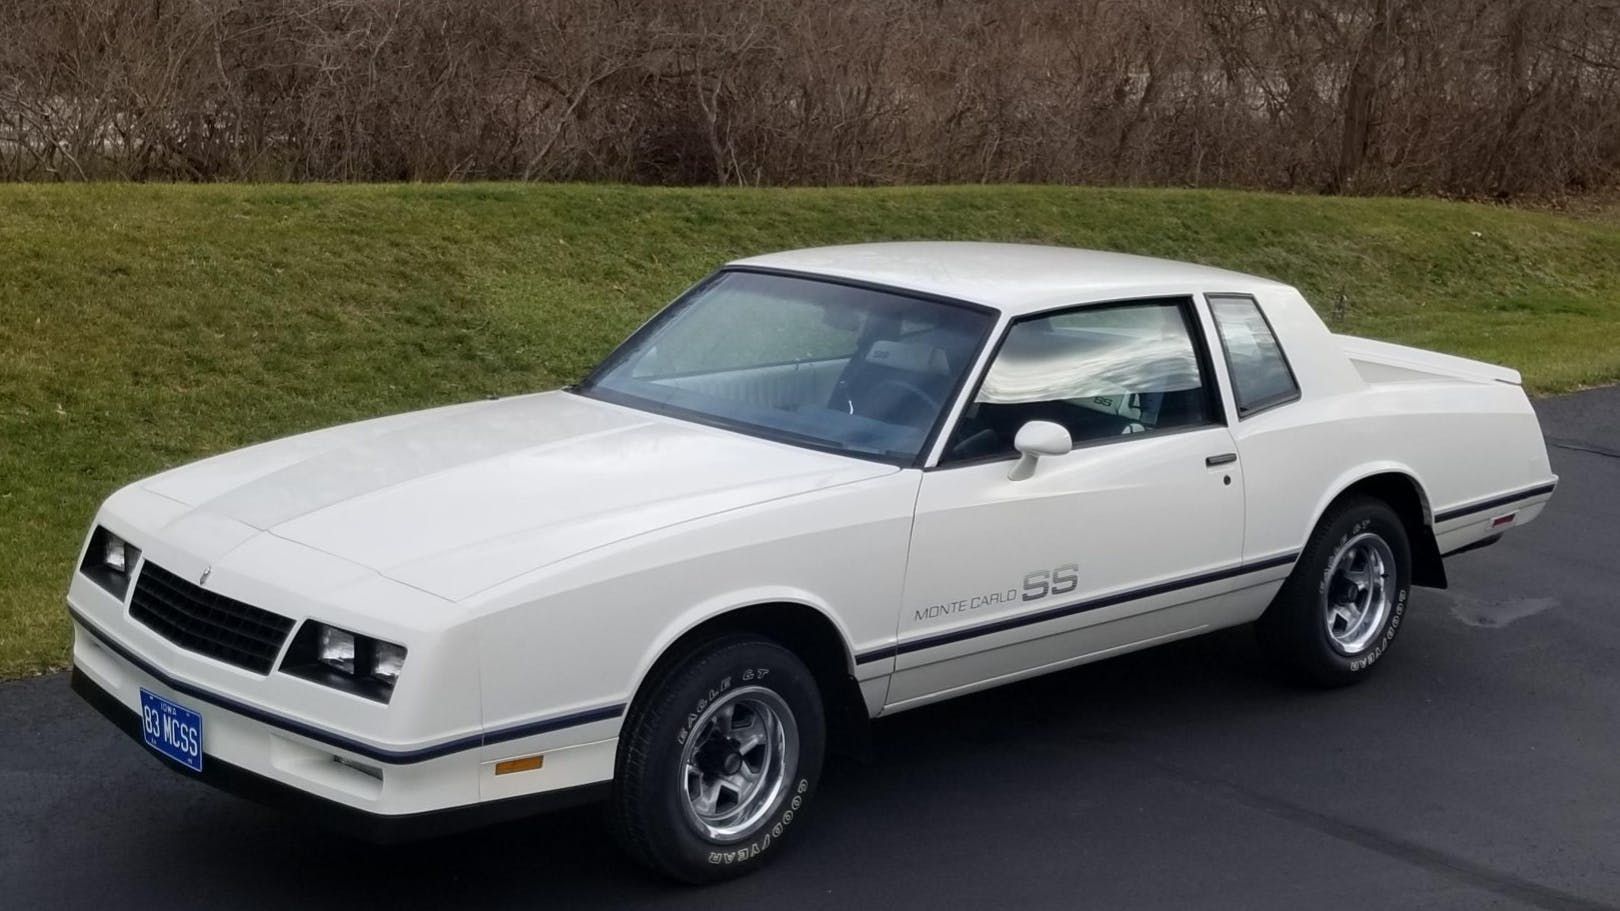 1983 Chevy Monte Carlo SS 